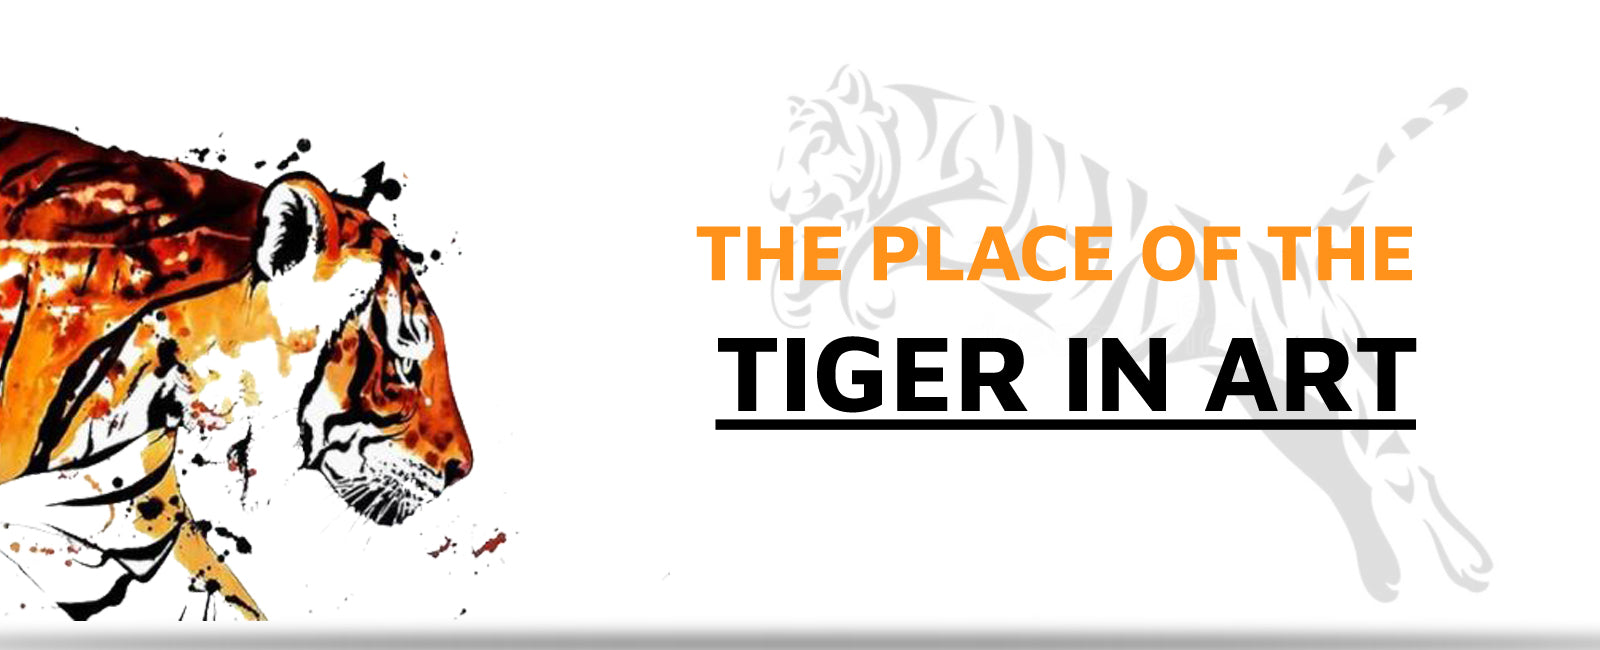 The Place of the Tiger in Art